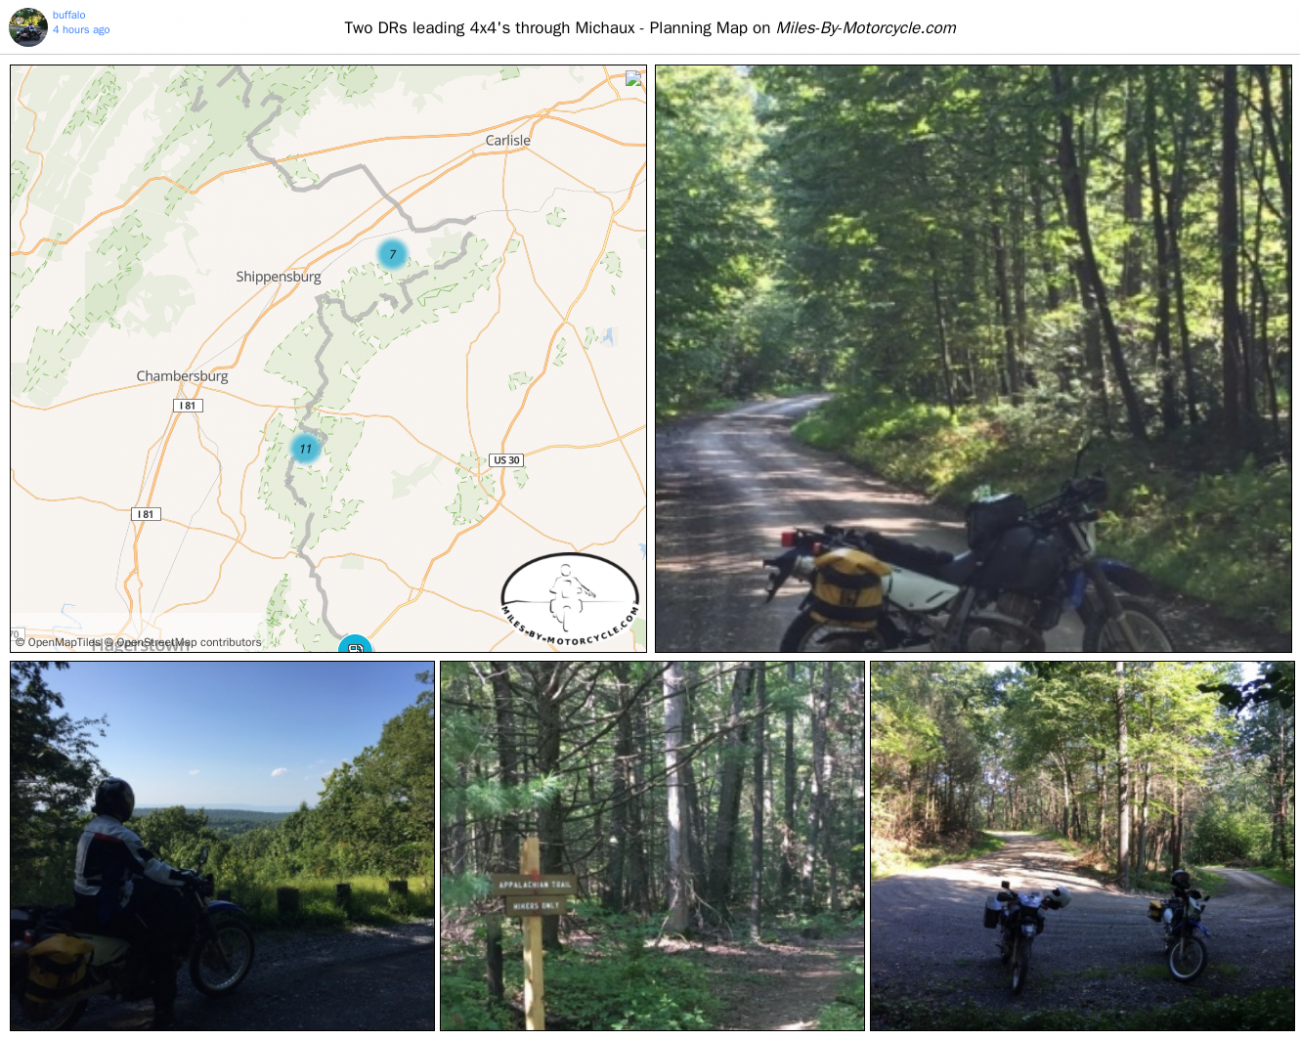 Two DRs leading 4x4's through Michaux - Planning Map